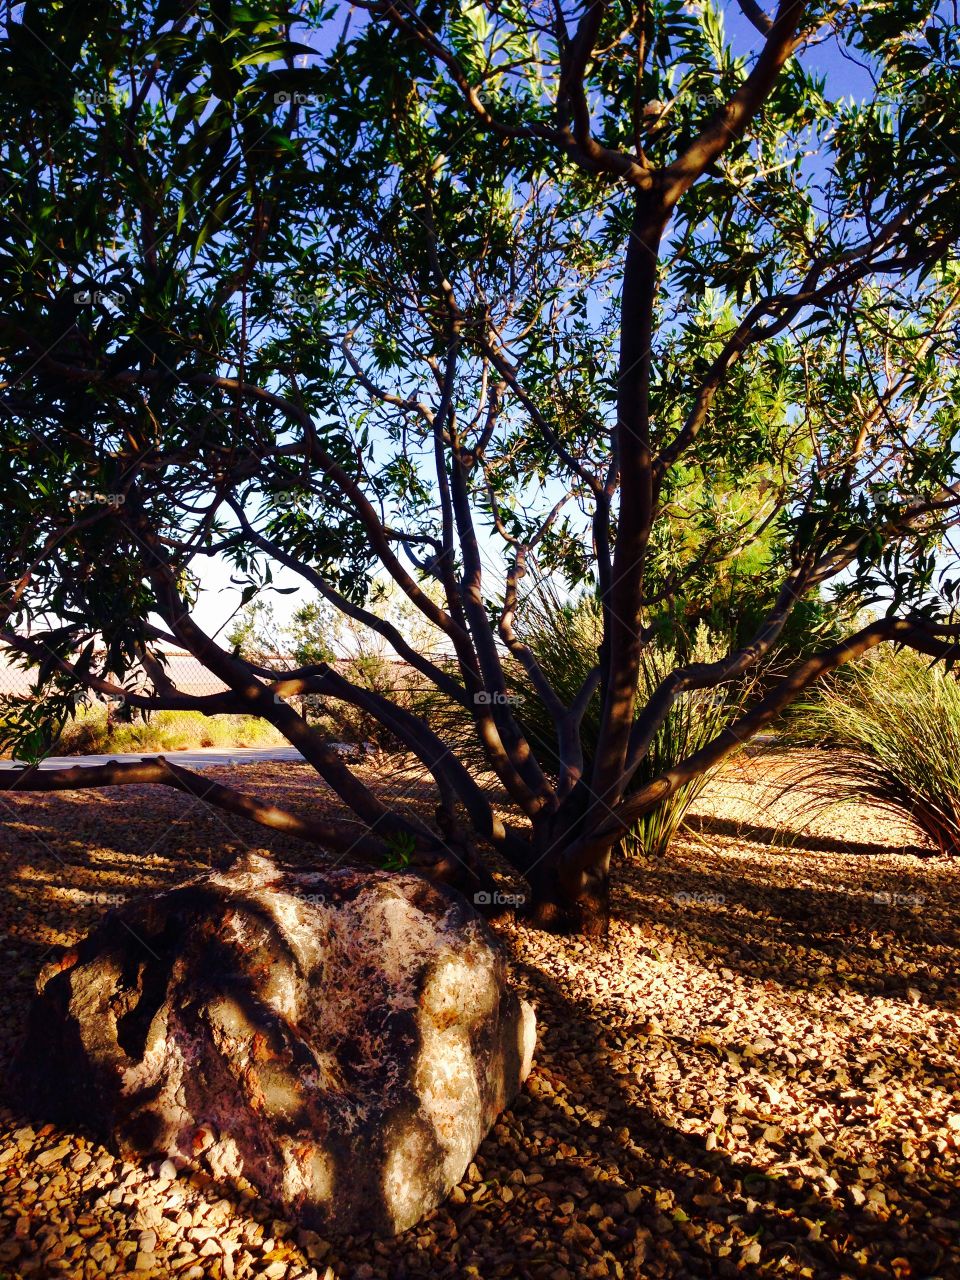 The Sitting Rock. Photo shot of a rock shaded by a tree